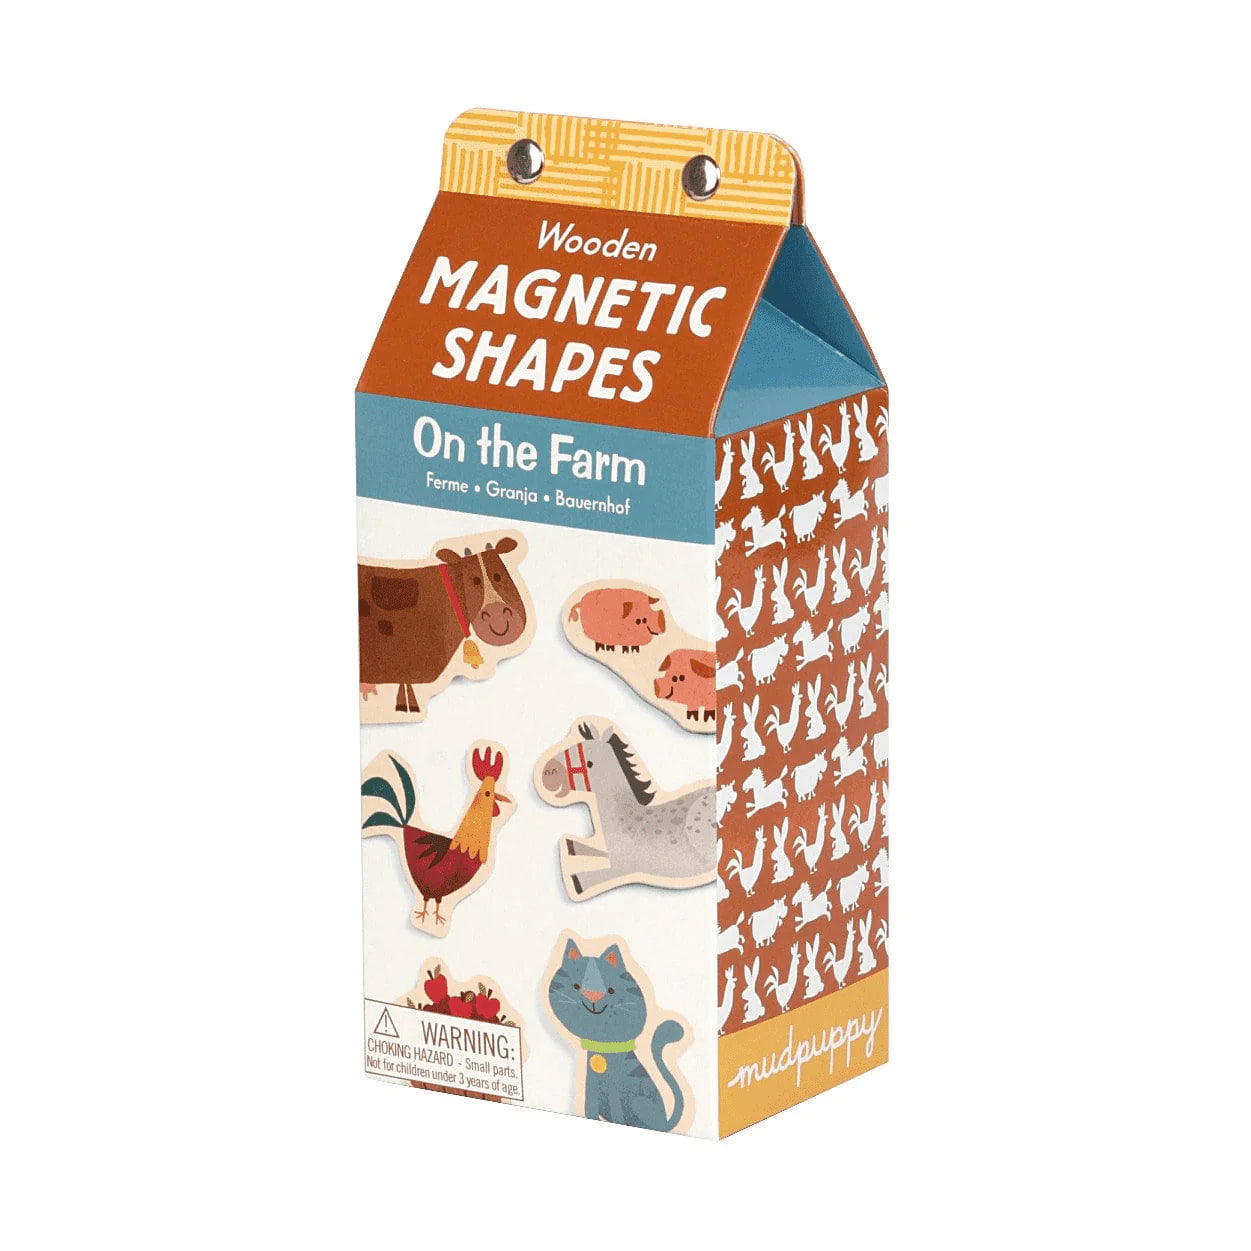 Aimants Ferme On the Farm Wooden Magnetic Shapes  - Mudpuppy